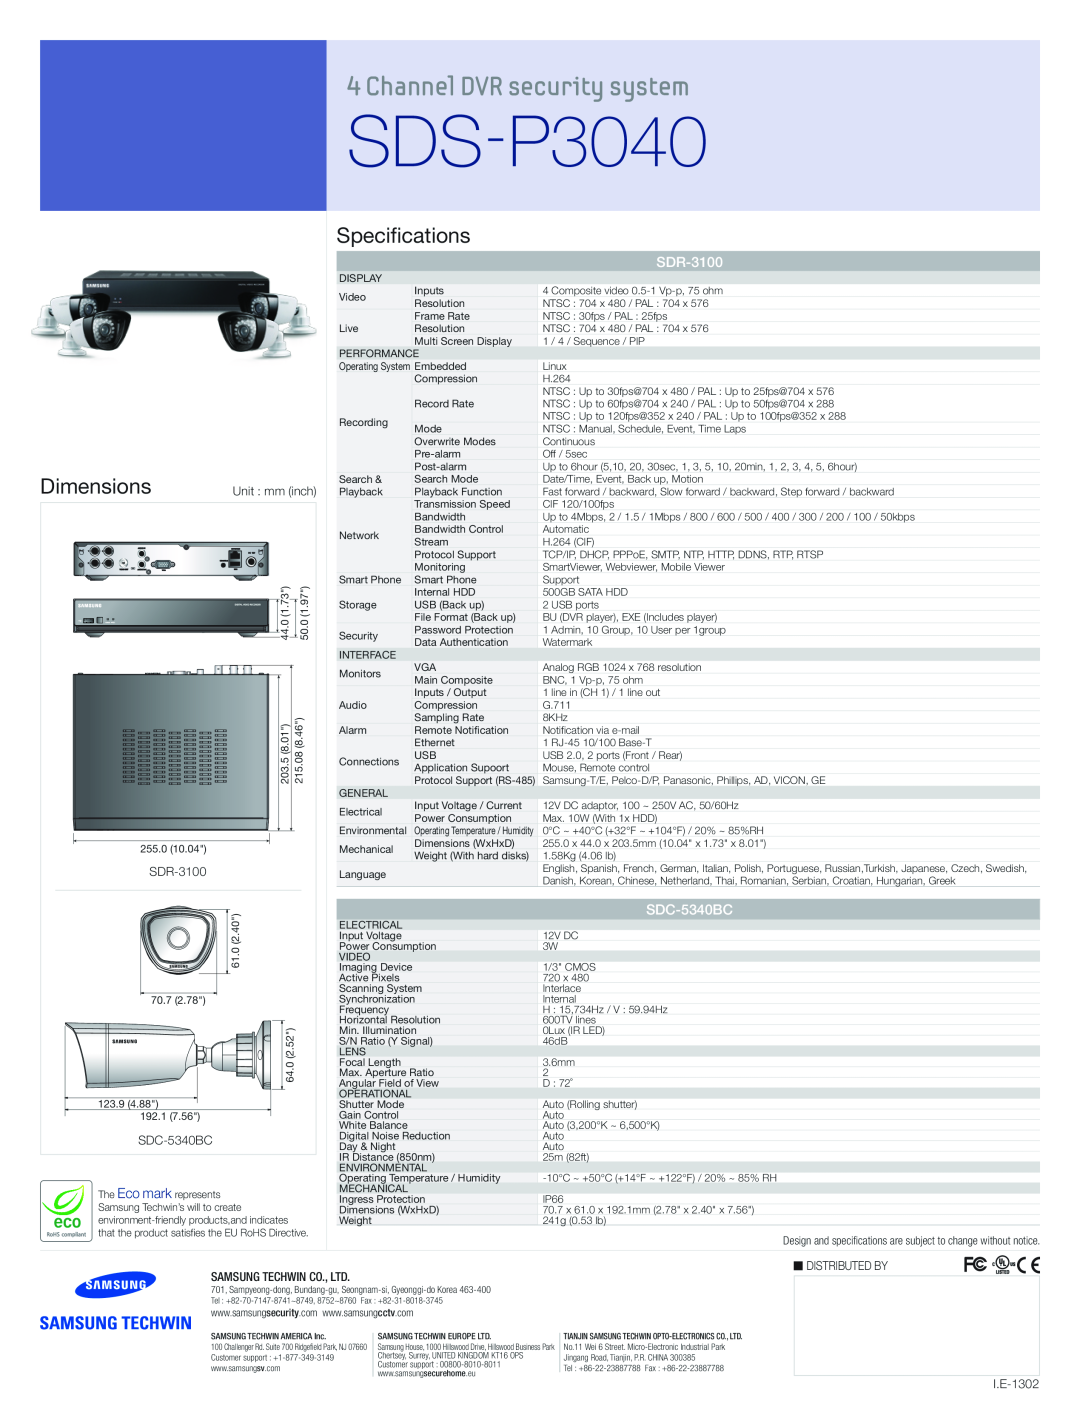 Samsung SDSV3040 SDS-P3040, Channel DVR security system, Dimensions, Specifications, SDR-3100, SDC-5340BC, Distributed By 